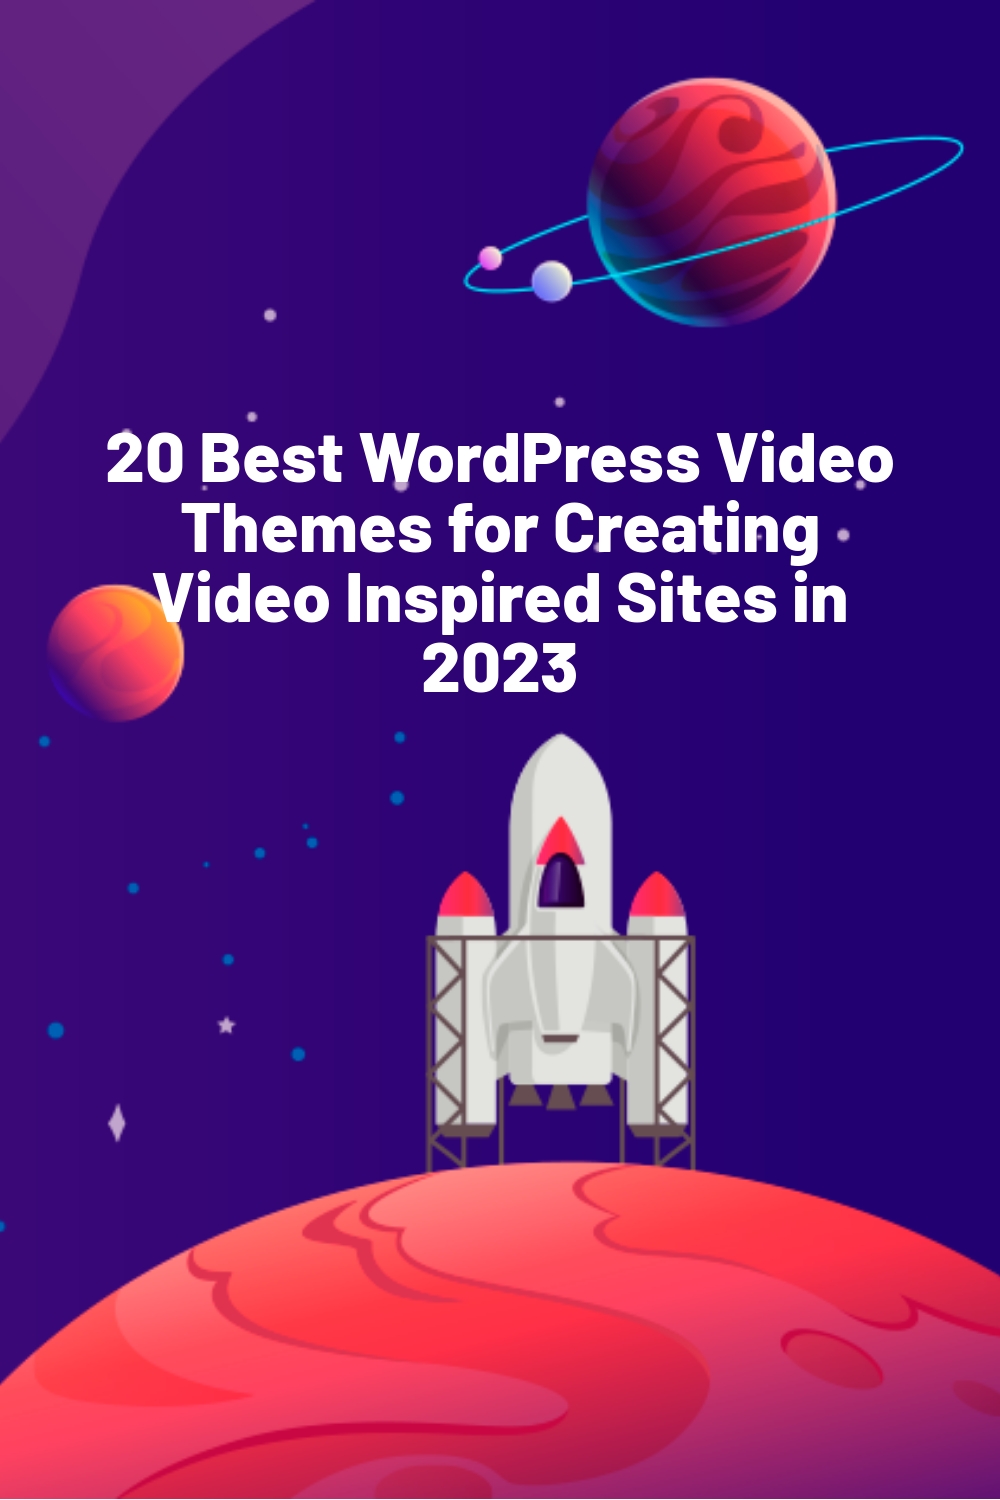 20 Best WordPress Video Themes for Creating Video Inspired Sites in 2023